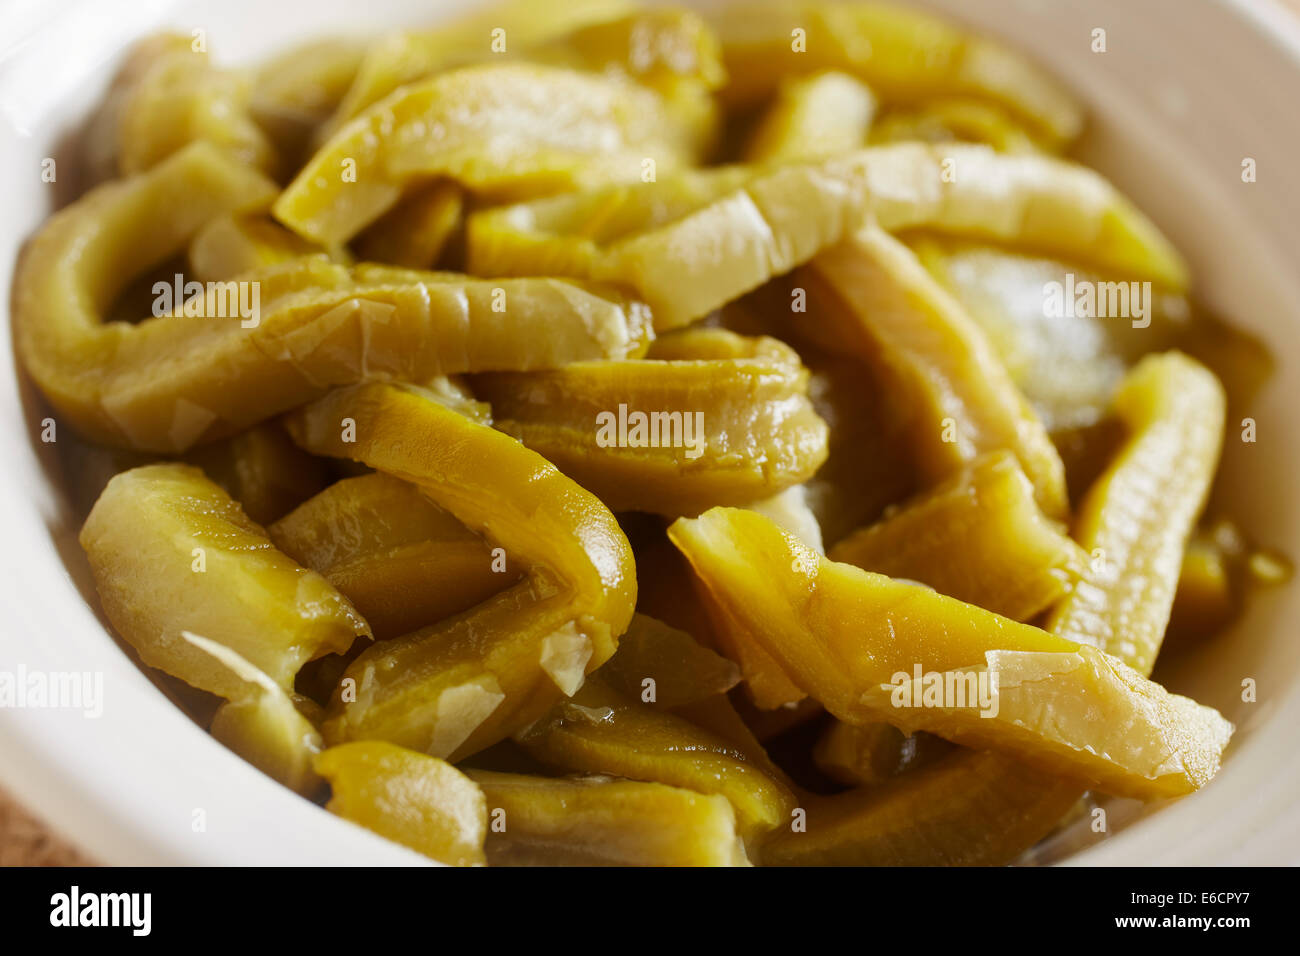 Strips of cooked Prickly Pear Cactus: Nopales Stock Photo